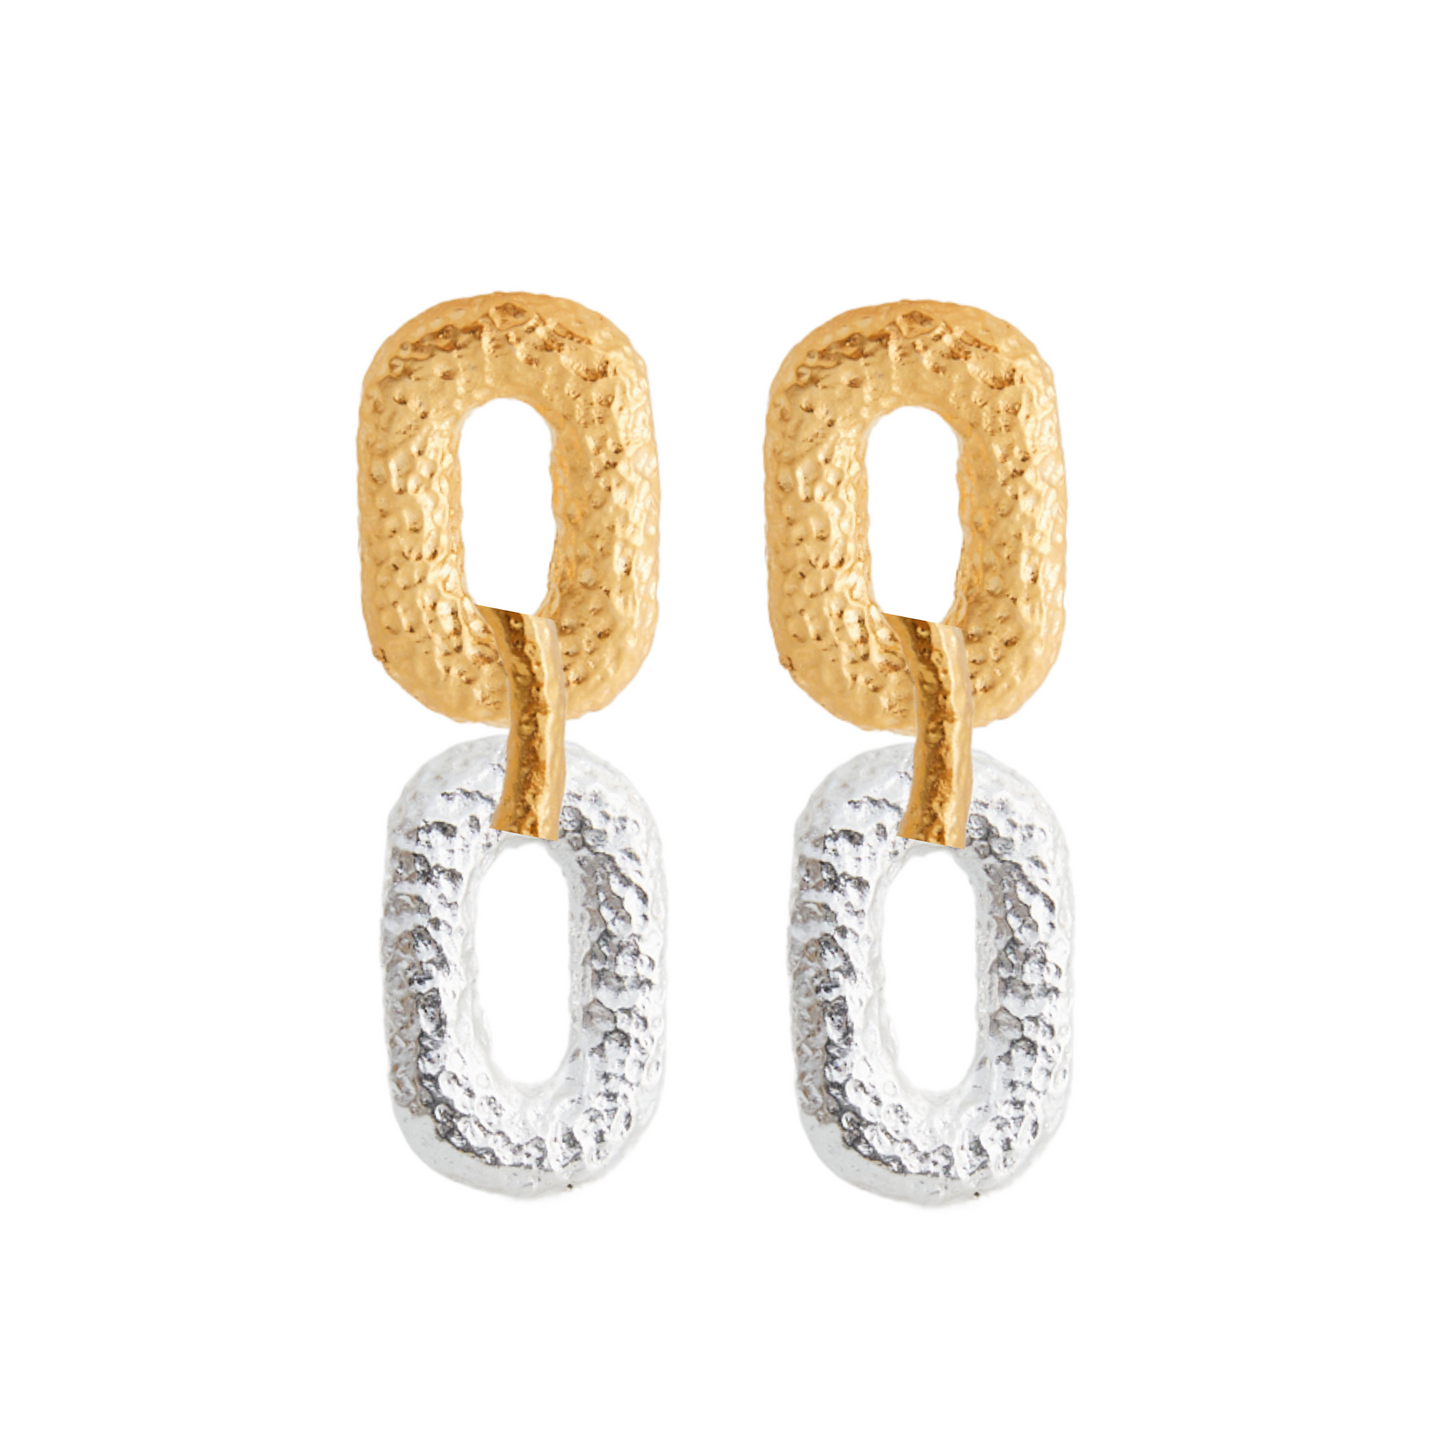 Mixed Connected Link Earrings (Gold & Silver)